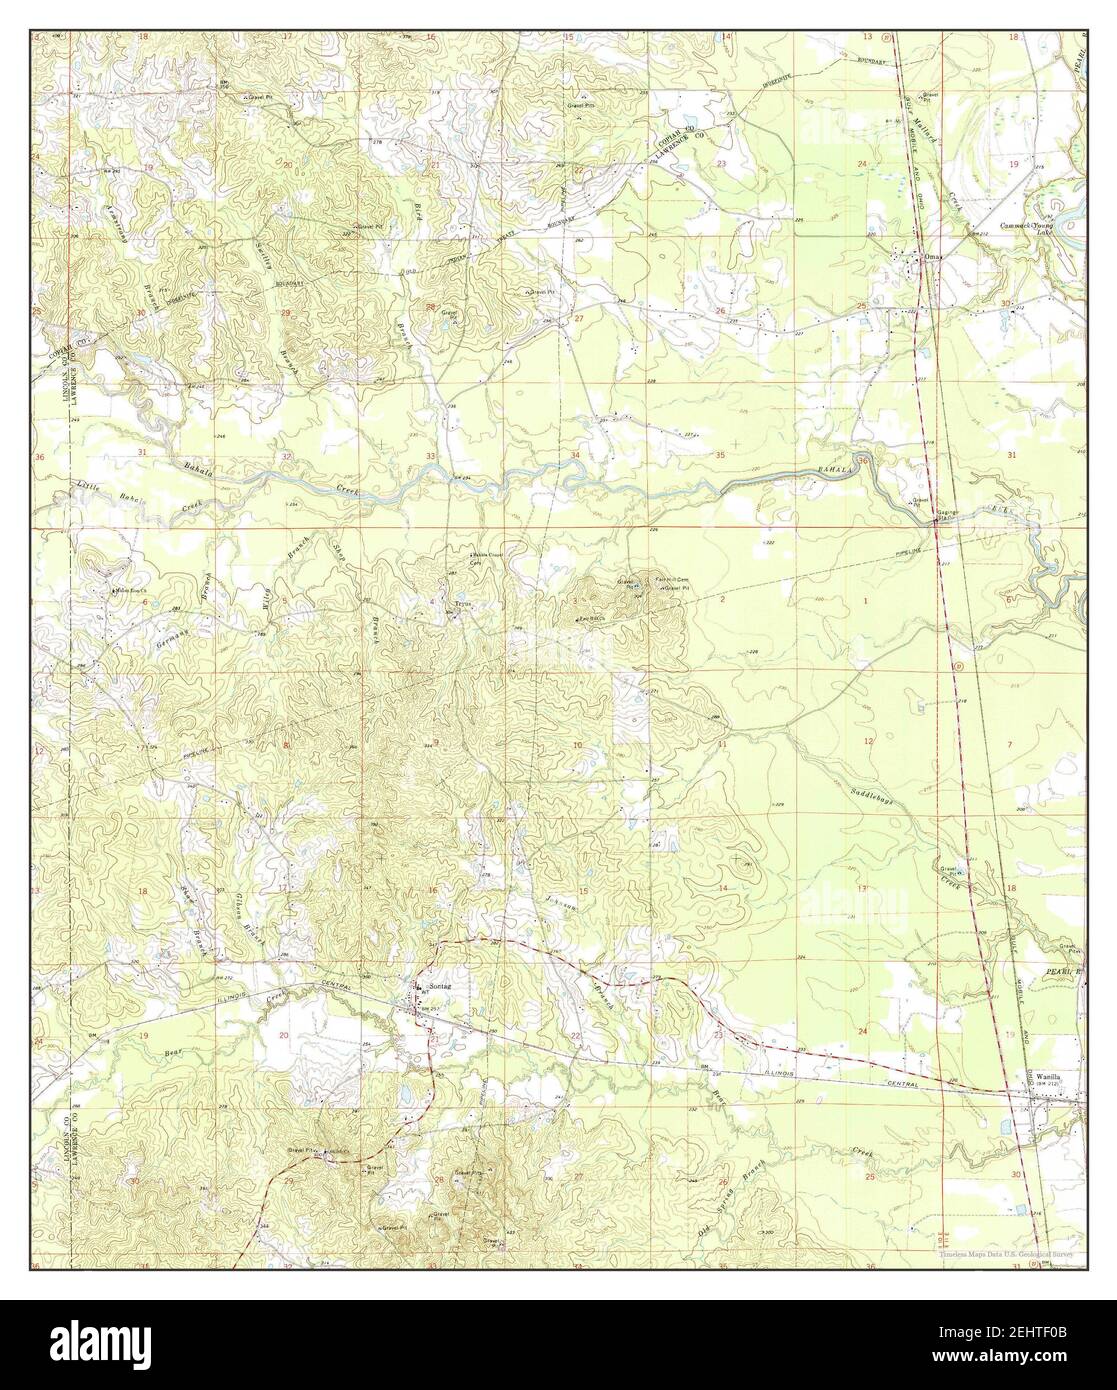 Oma, Mississippi, map 1971, 1:24000, United States of America by Timeless Maps, data U.S. Geological Survey Stock Photo